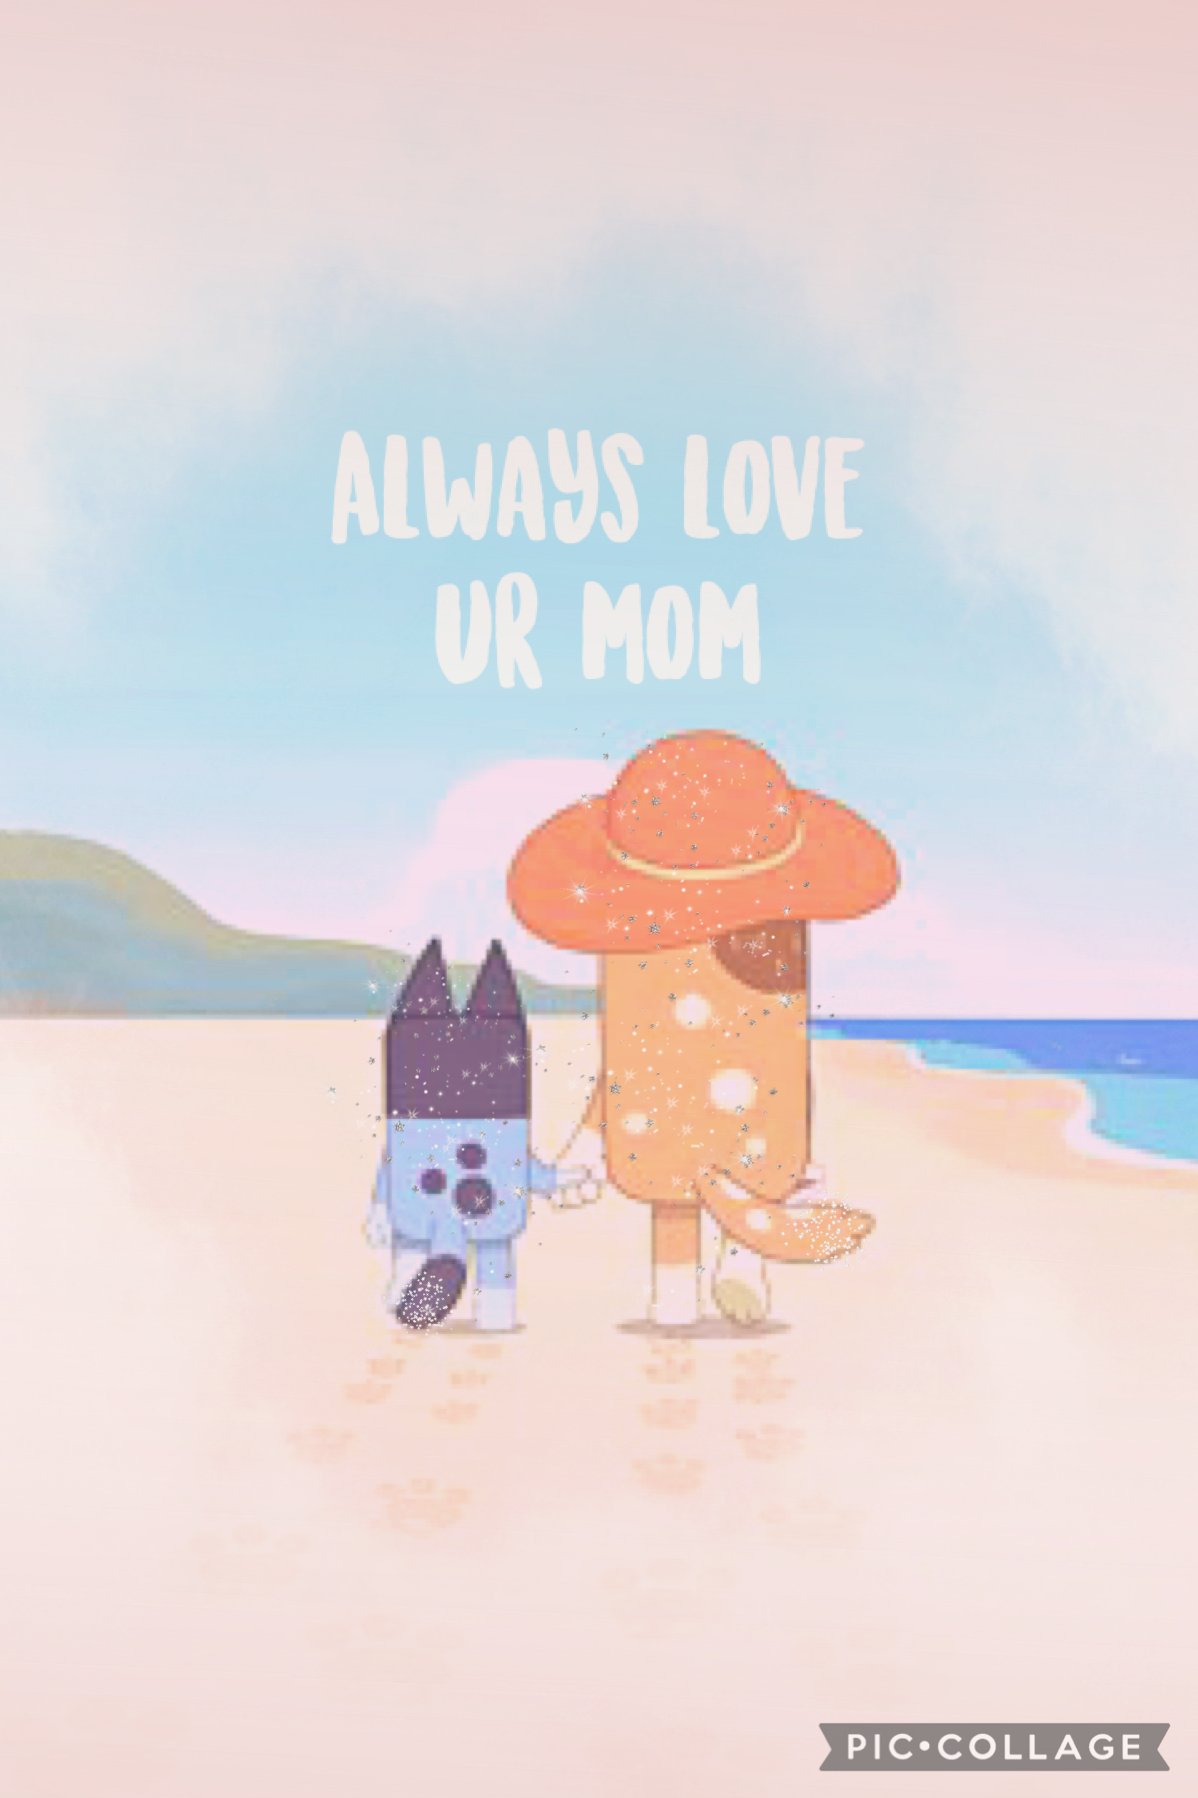 I know it’s not Mother’s Day but always love ur mom